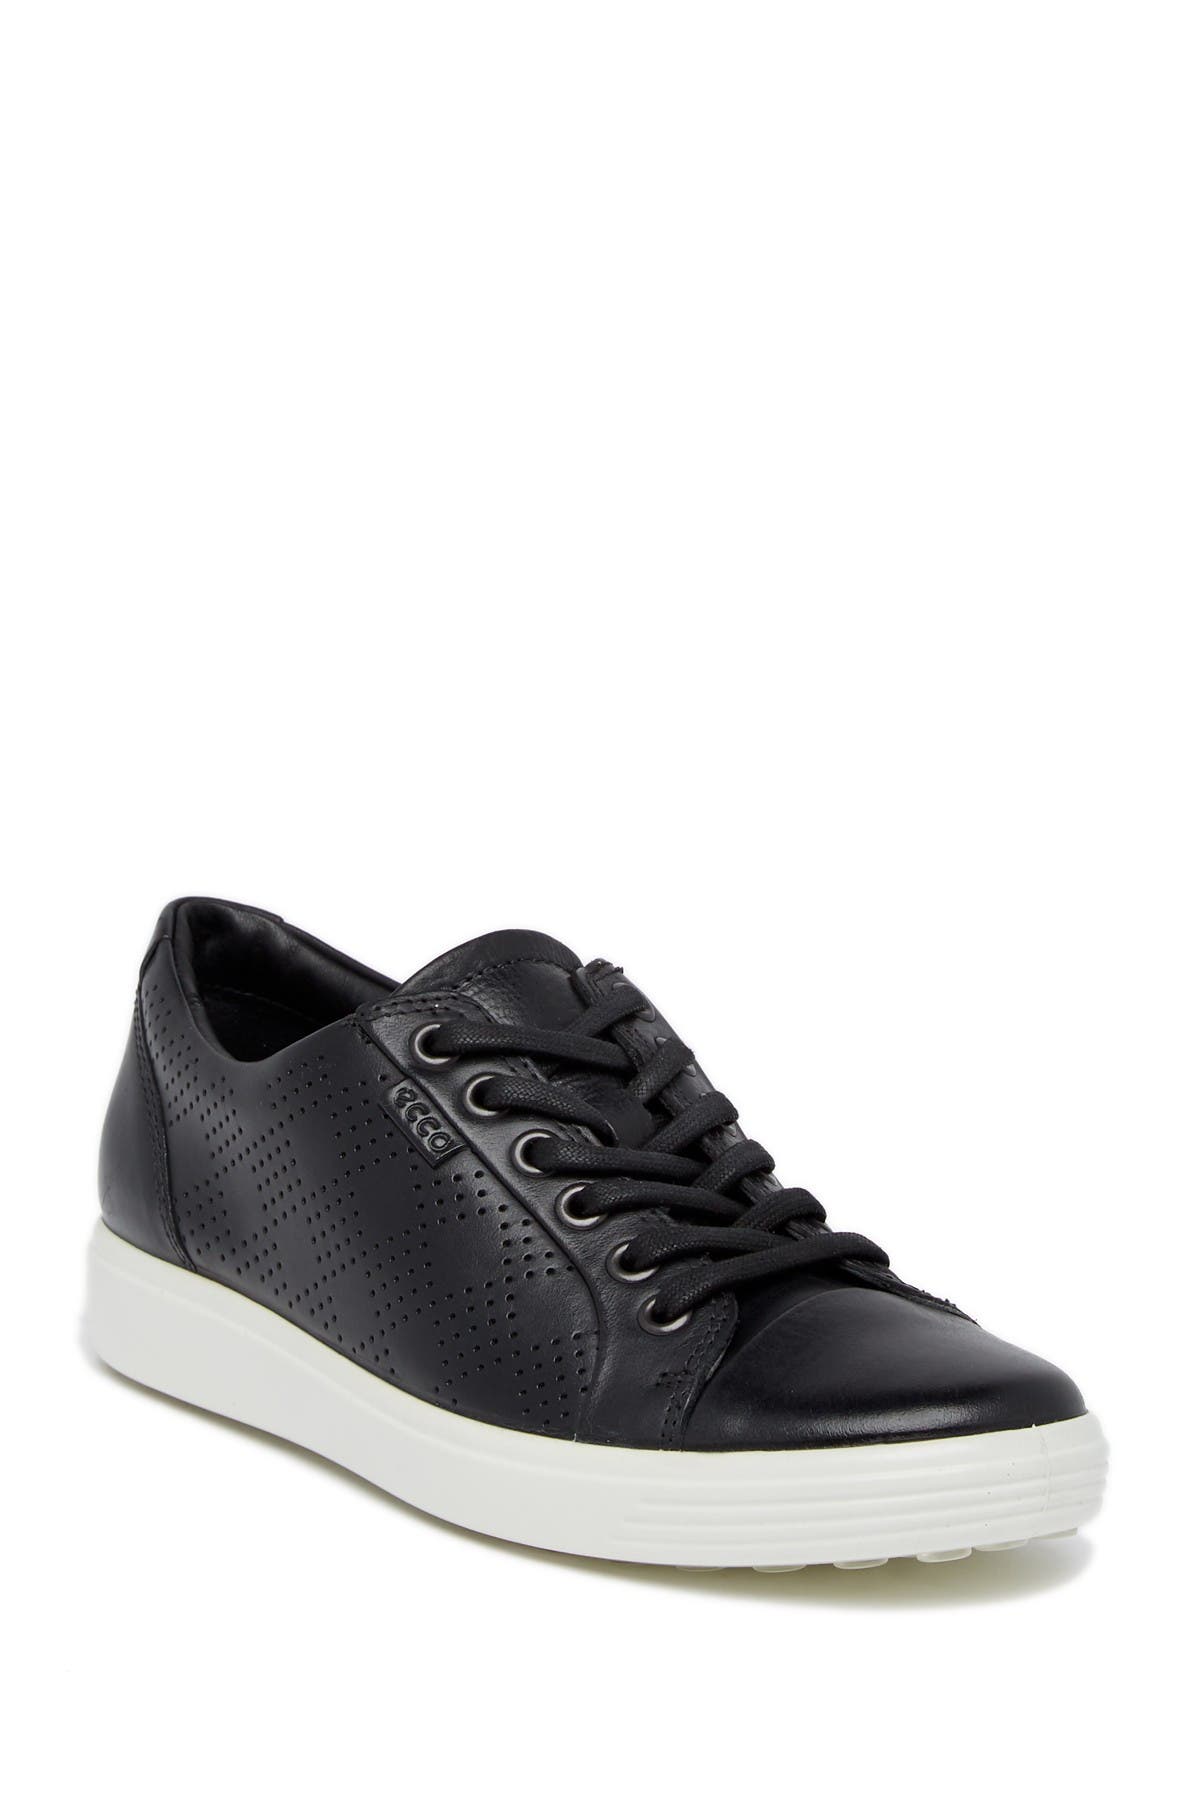 ecco soft perforated fashion sneaker